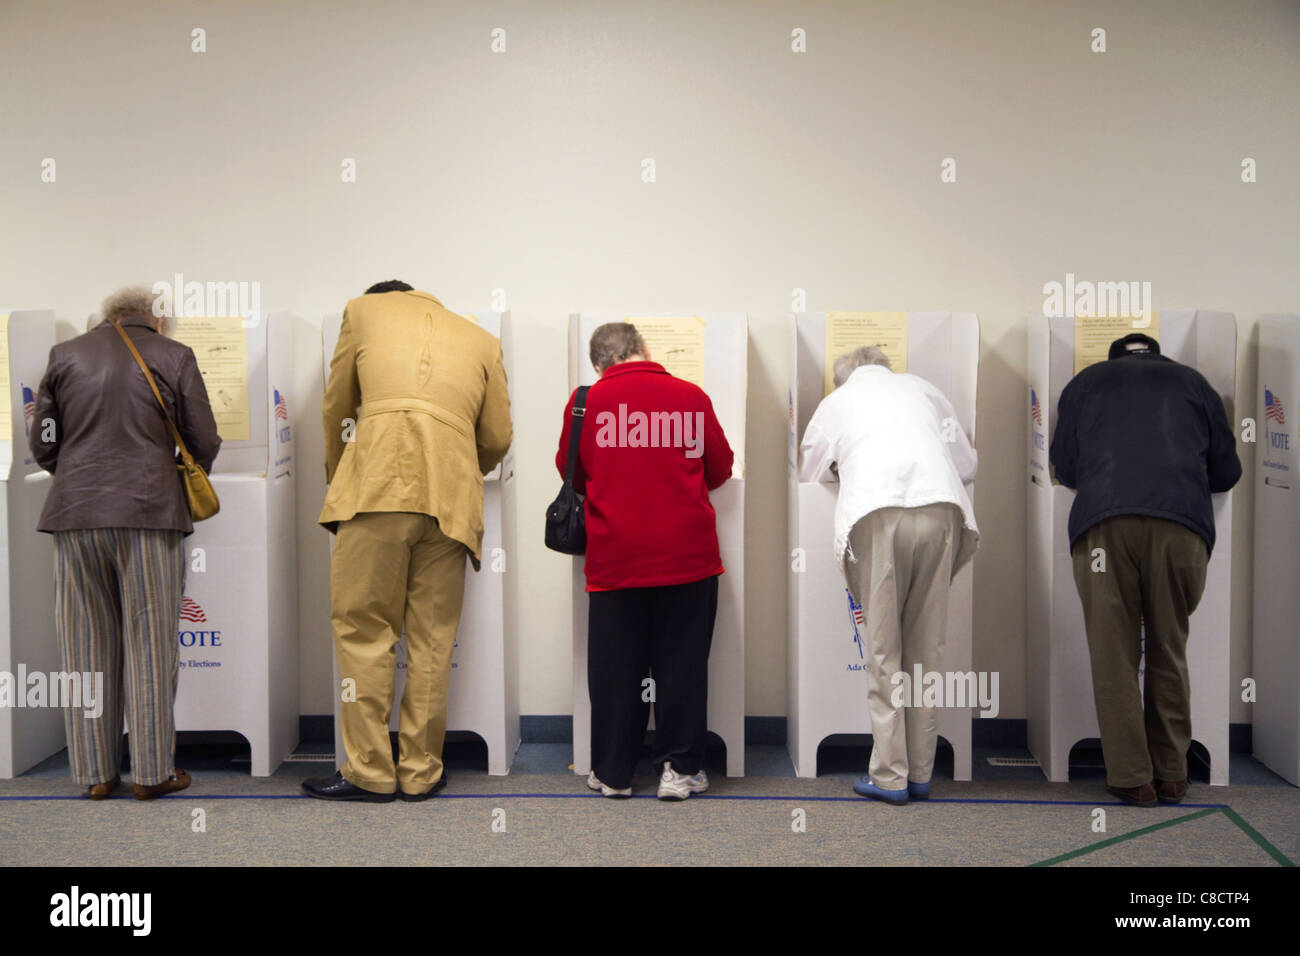 American citizens voting on election day in Boise, Idaho, USA. Stock Photo